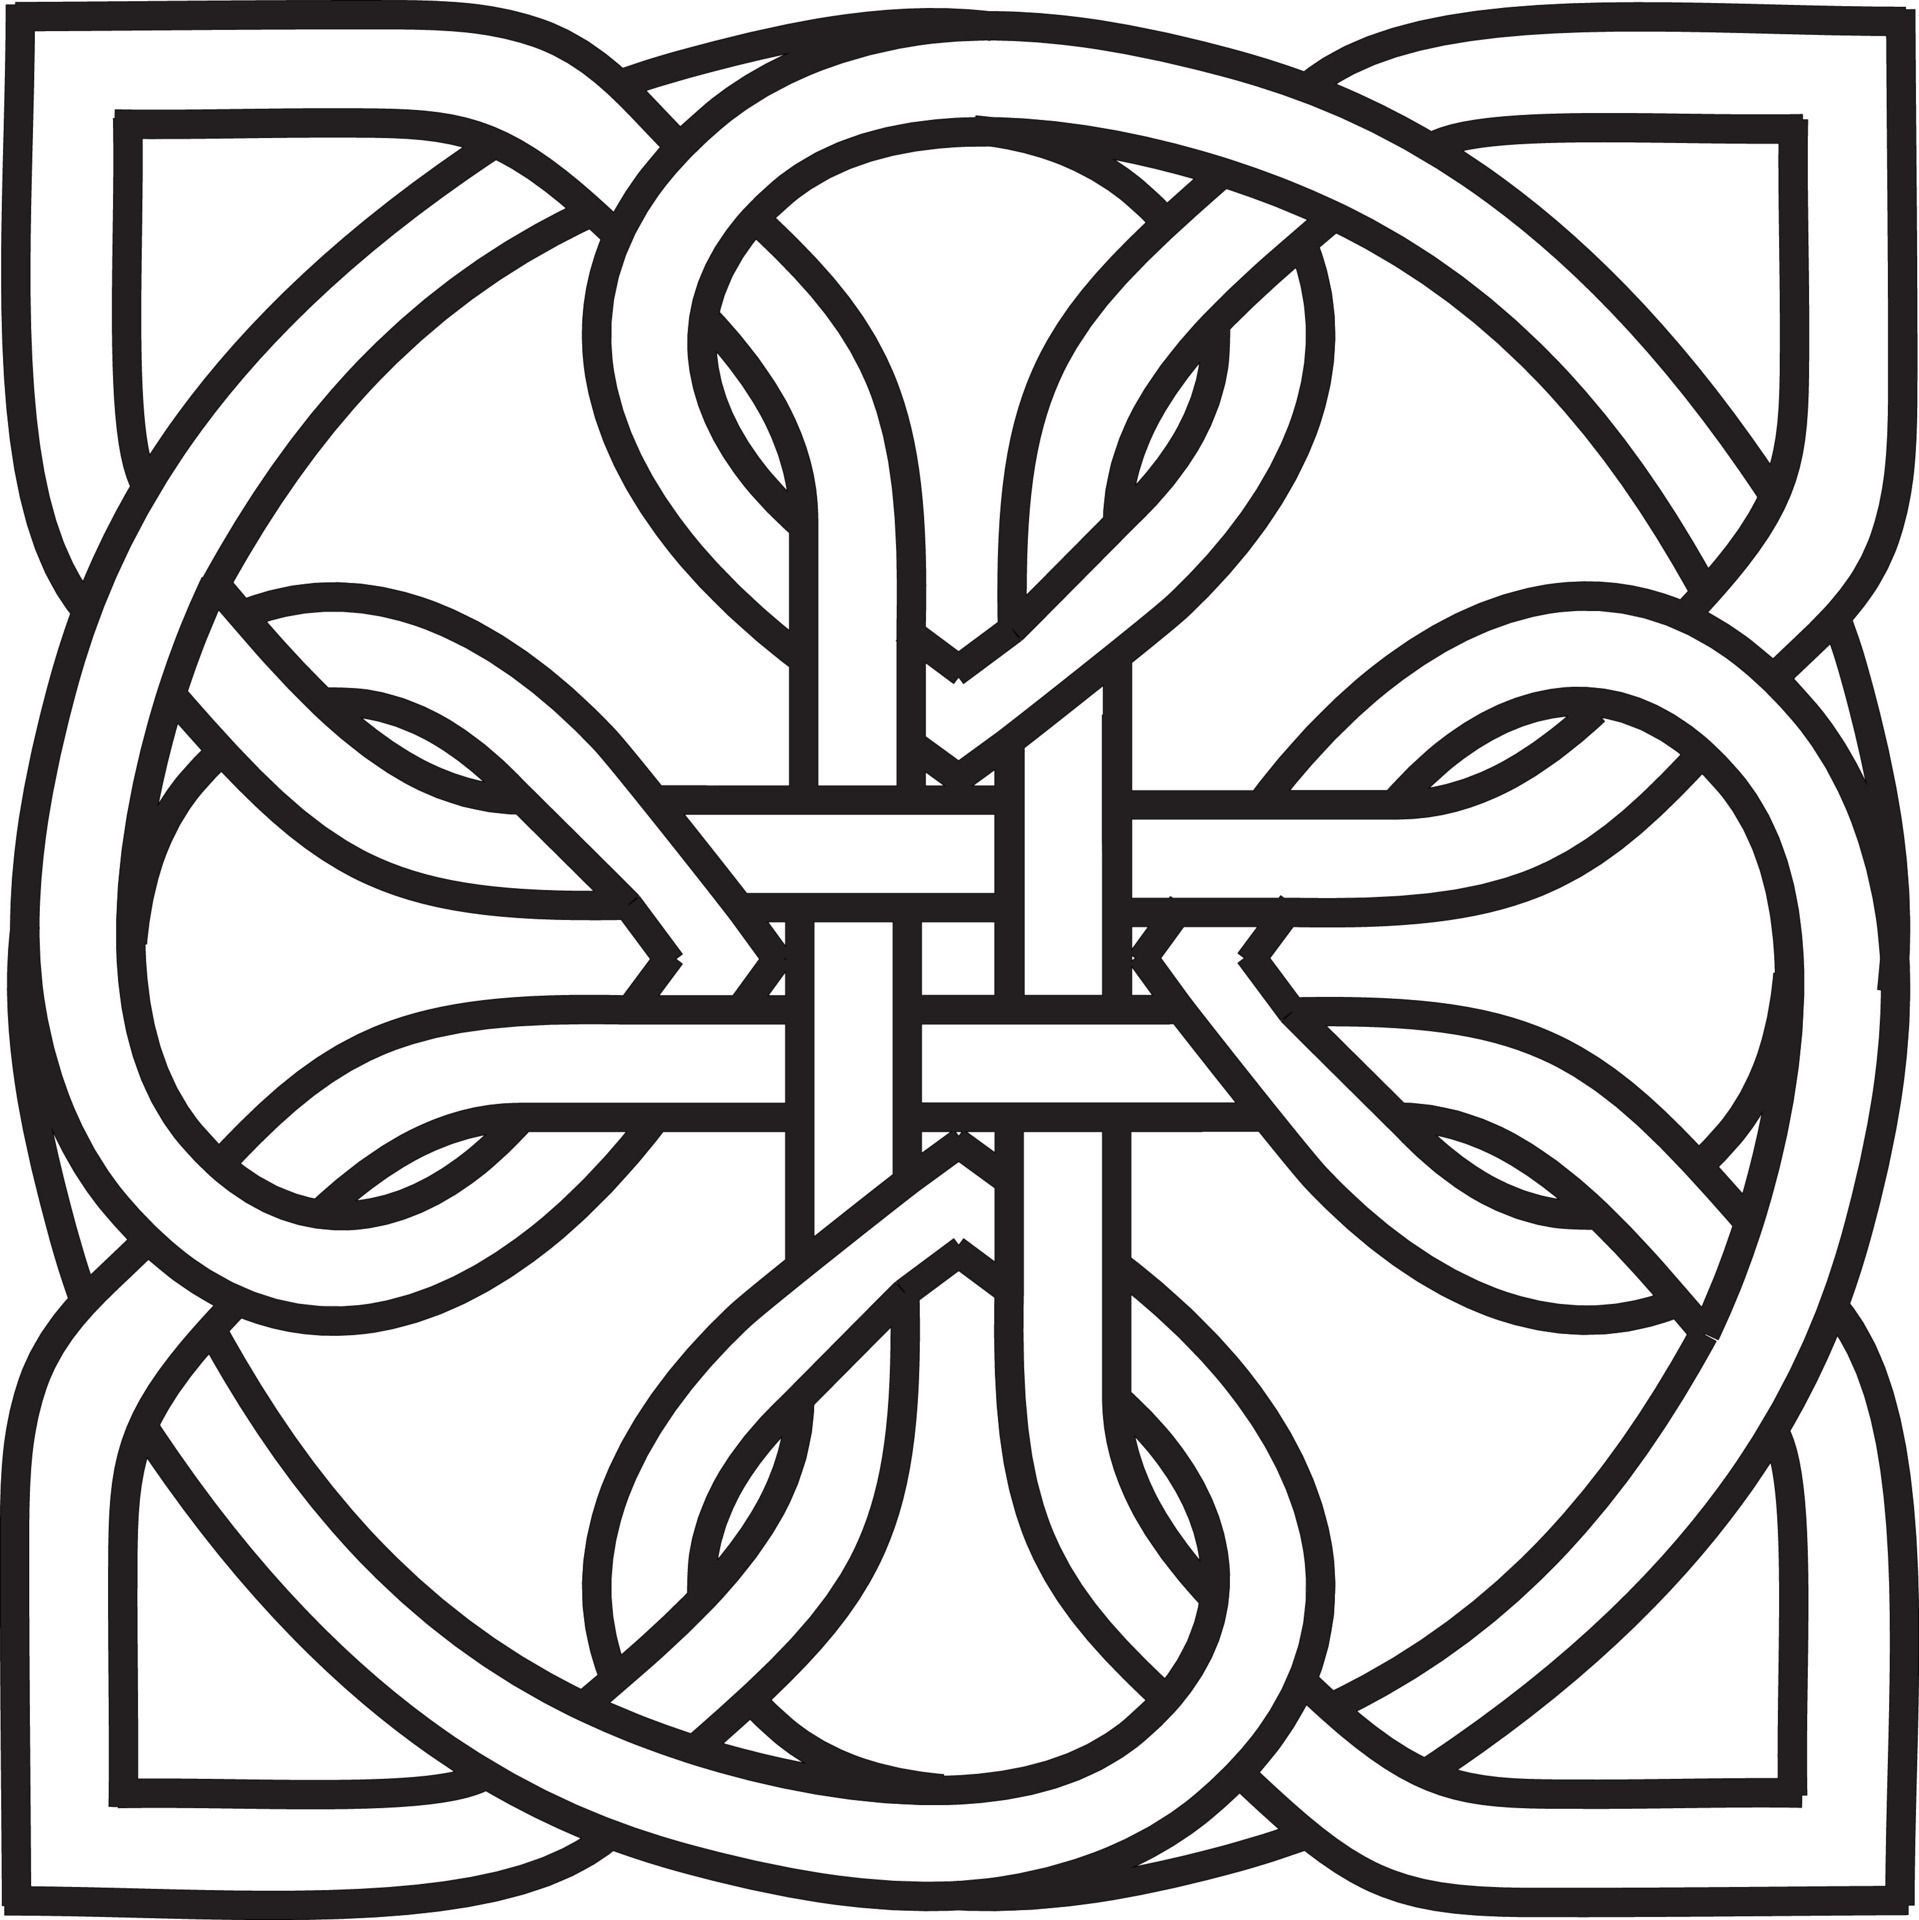 Top 20 Irish Celtic Symbols And Their Meanings Explained